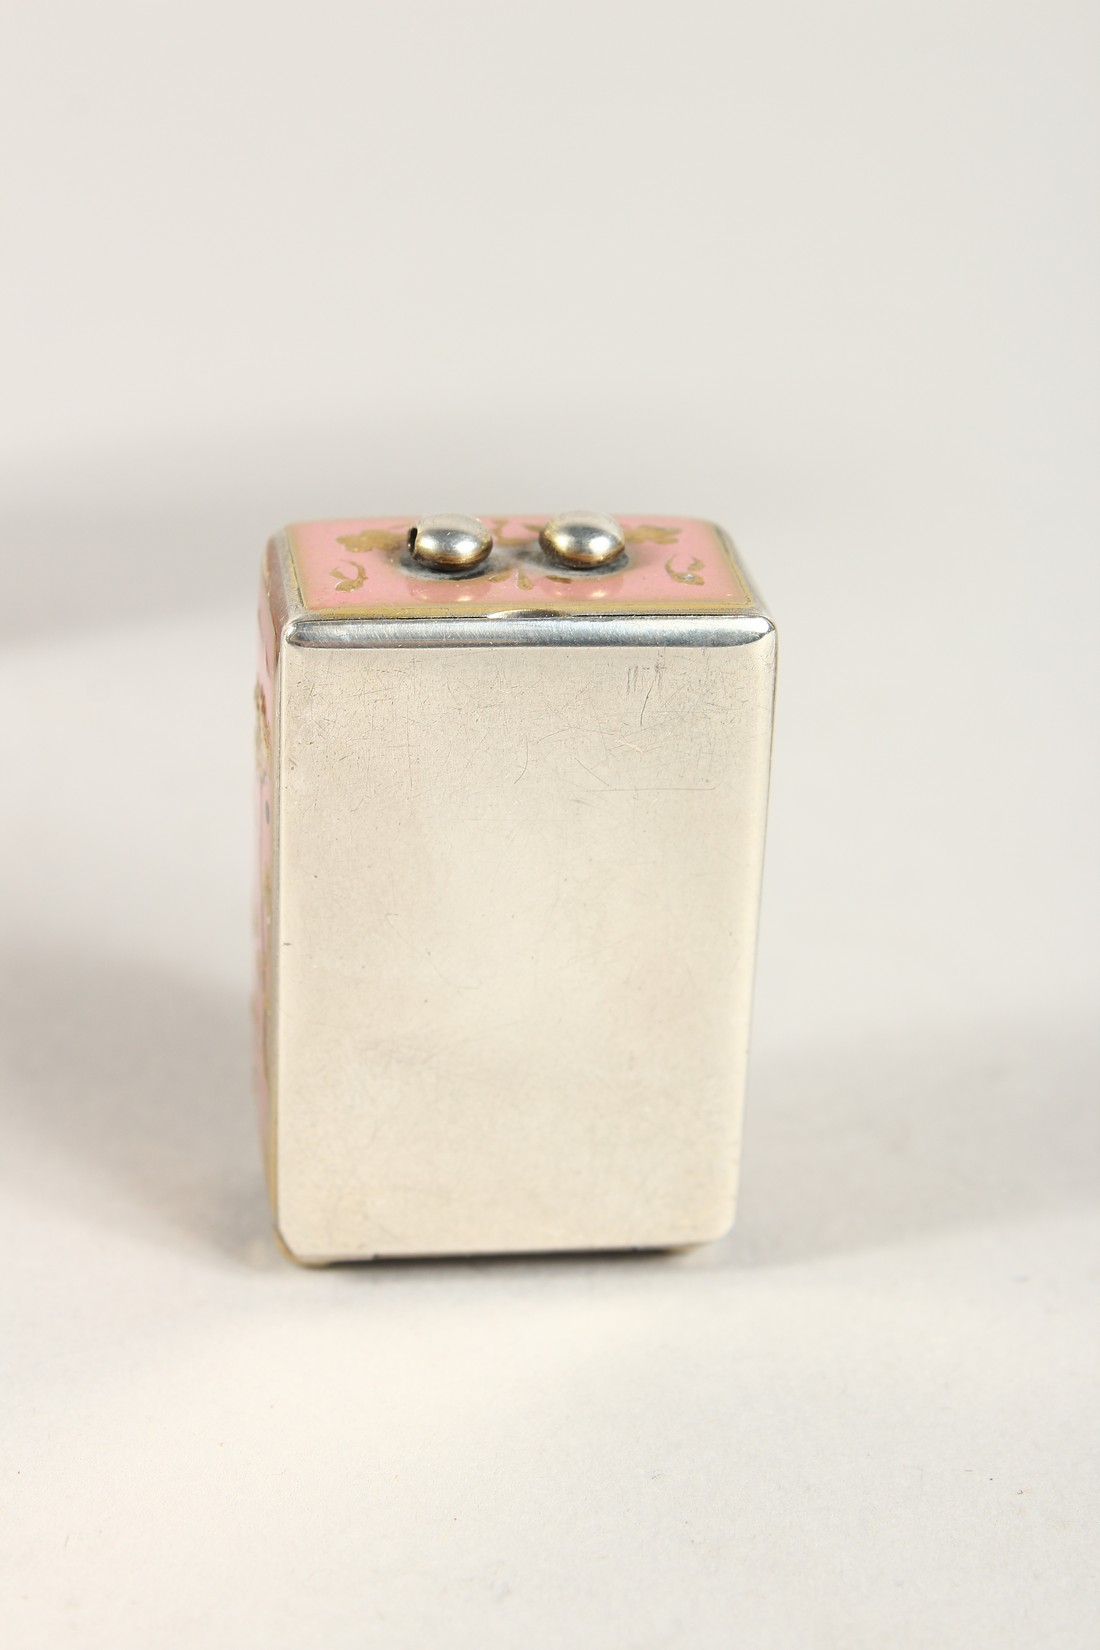 A SUPERB SMALL SILVER AND PINK ENAMEL CLOCK in a folding leather case. 1.5ins - Image 3 of 8